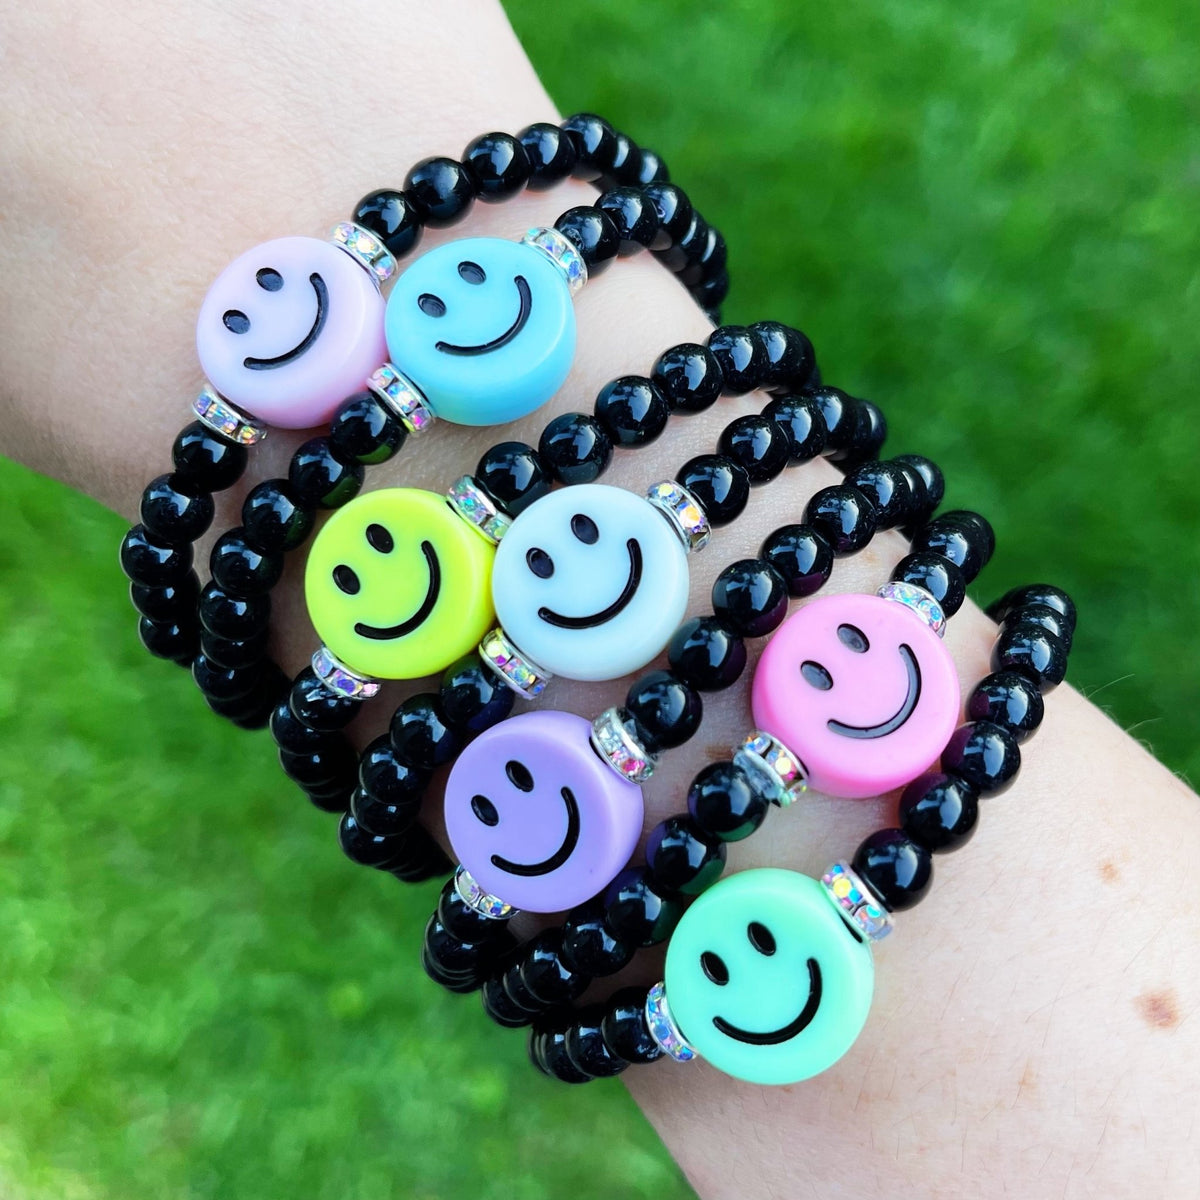 Large Smiley Face Bead Bracelet - Bling It On! Small Adult - 6.5 Inches / Light Blue